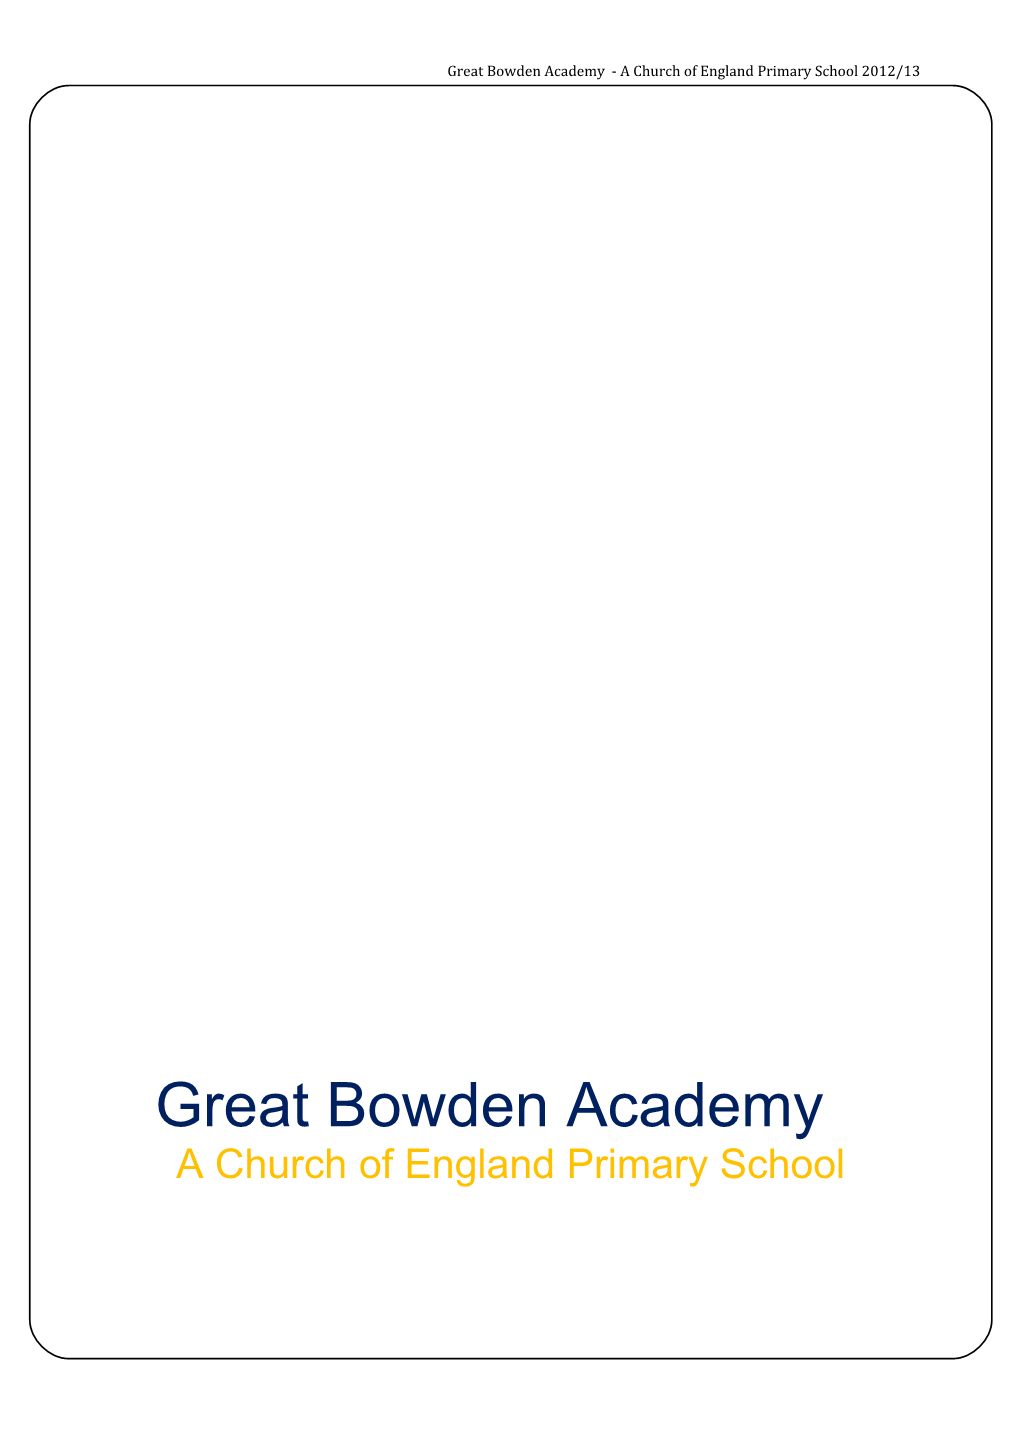 Great Bowden Academy - a Church of England Primary School